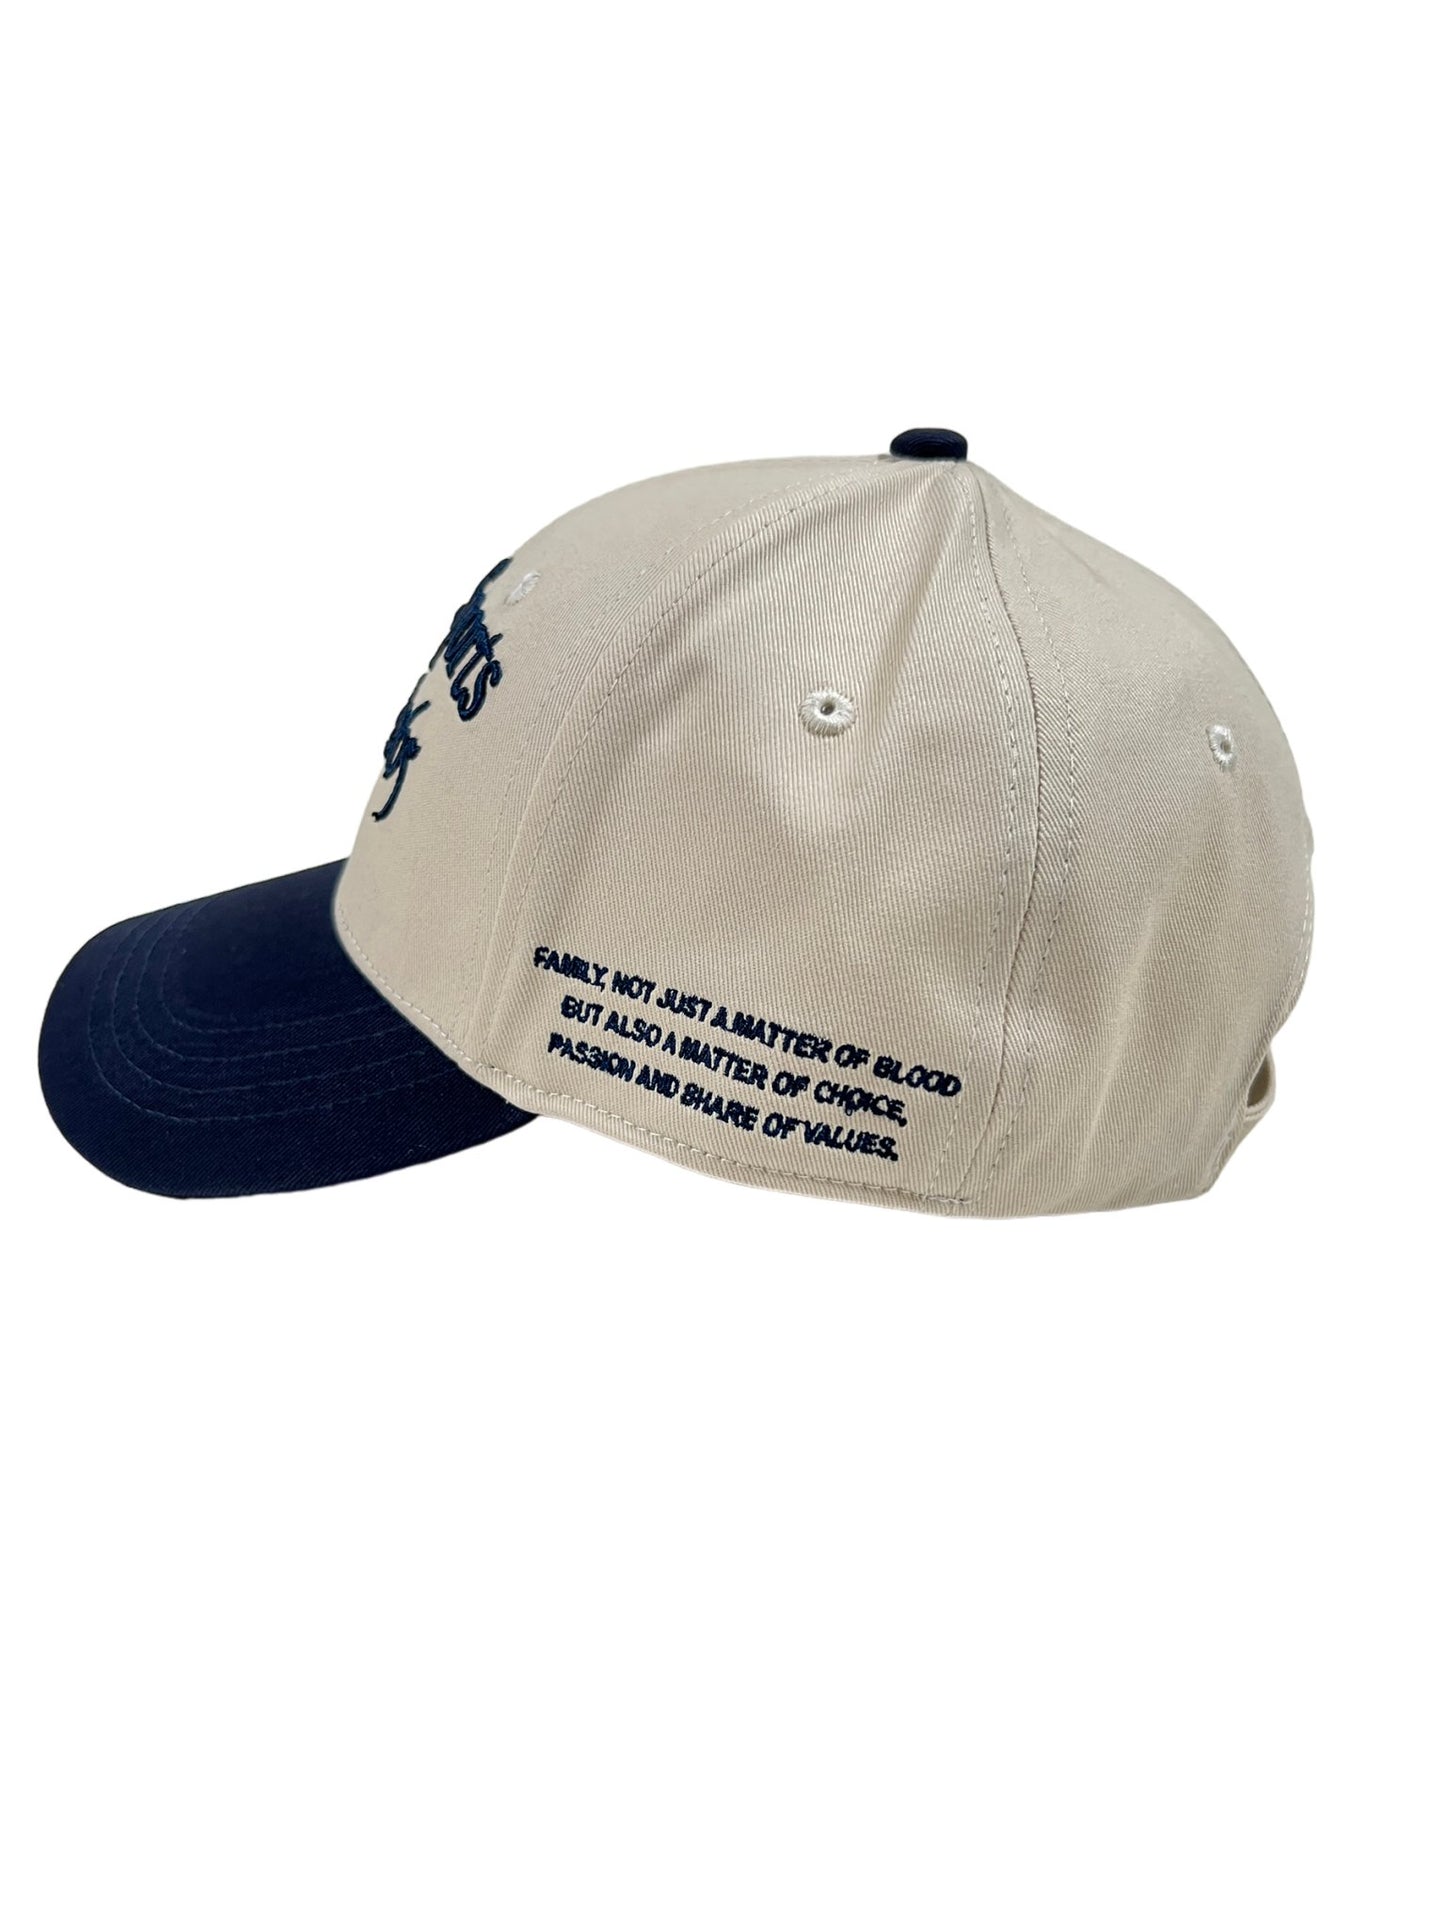 An embroidered FAMILY FIRST hat with a quote about FAMILY on it.